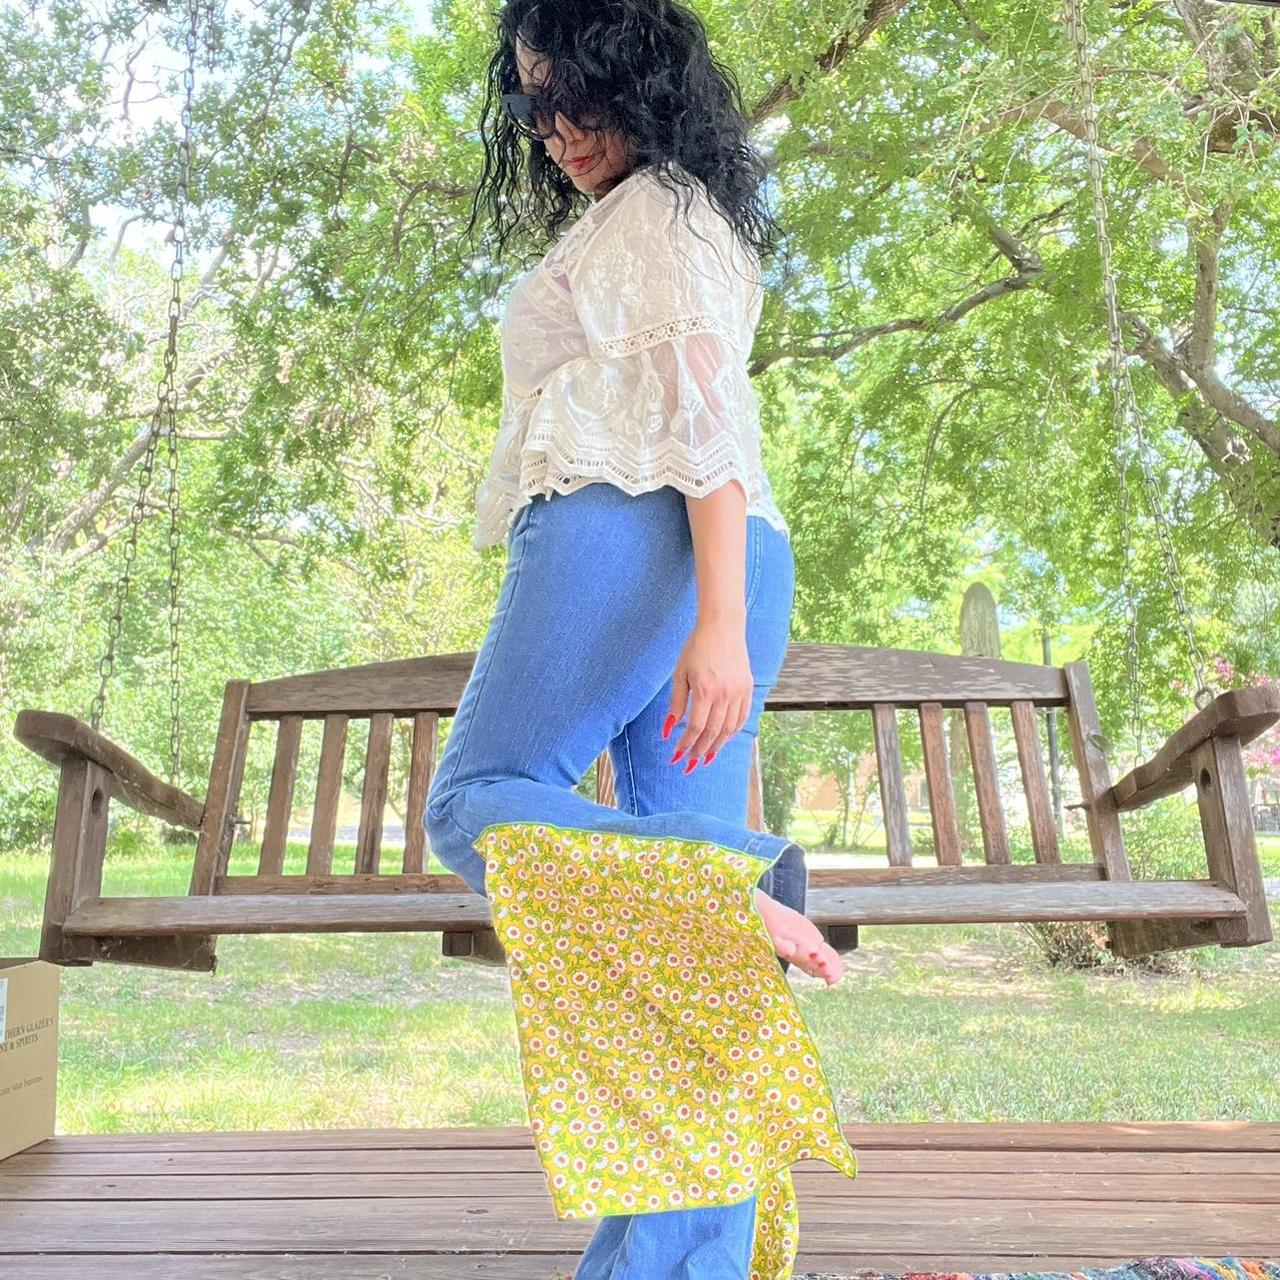 Sunflower Yellow Cotton Pants, Bell-bottom Flare Jeans Vintage 70s